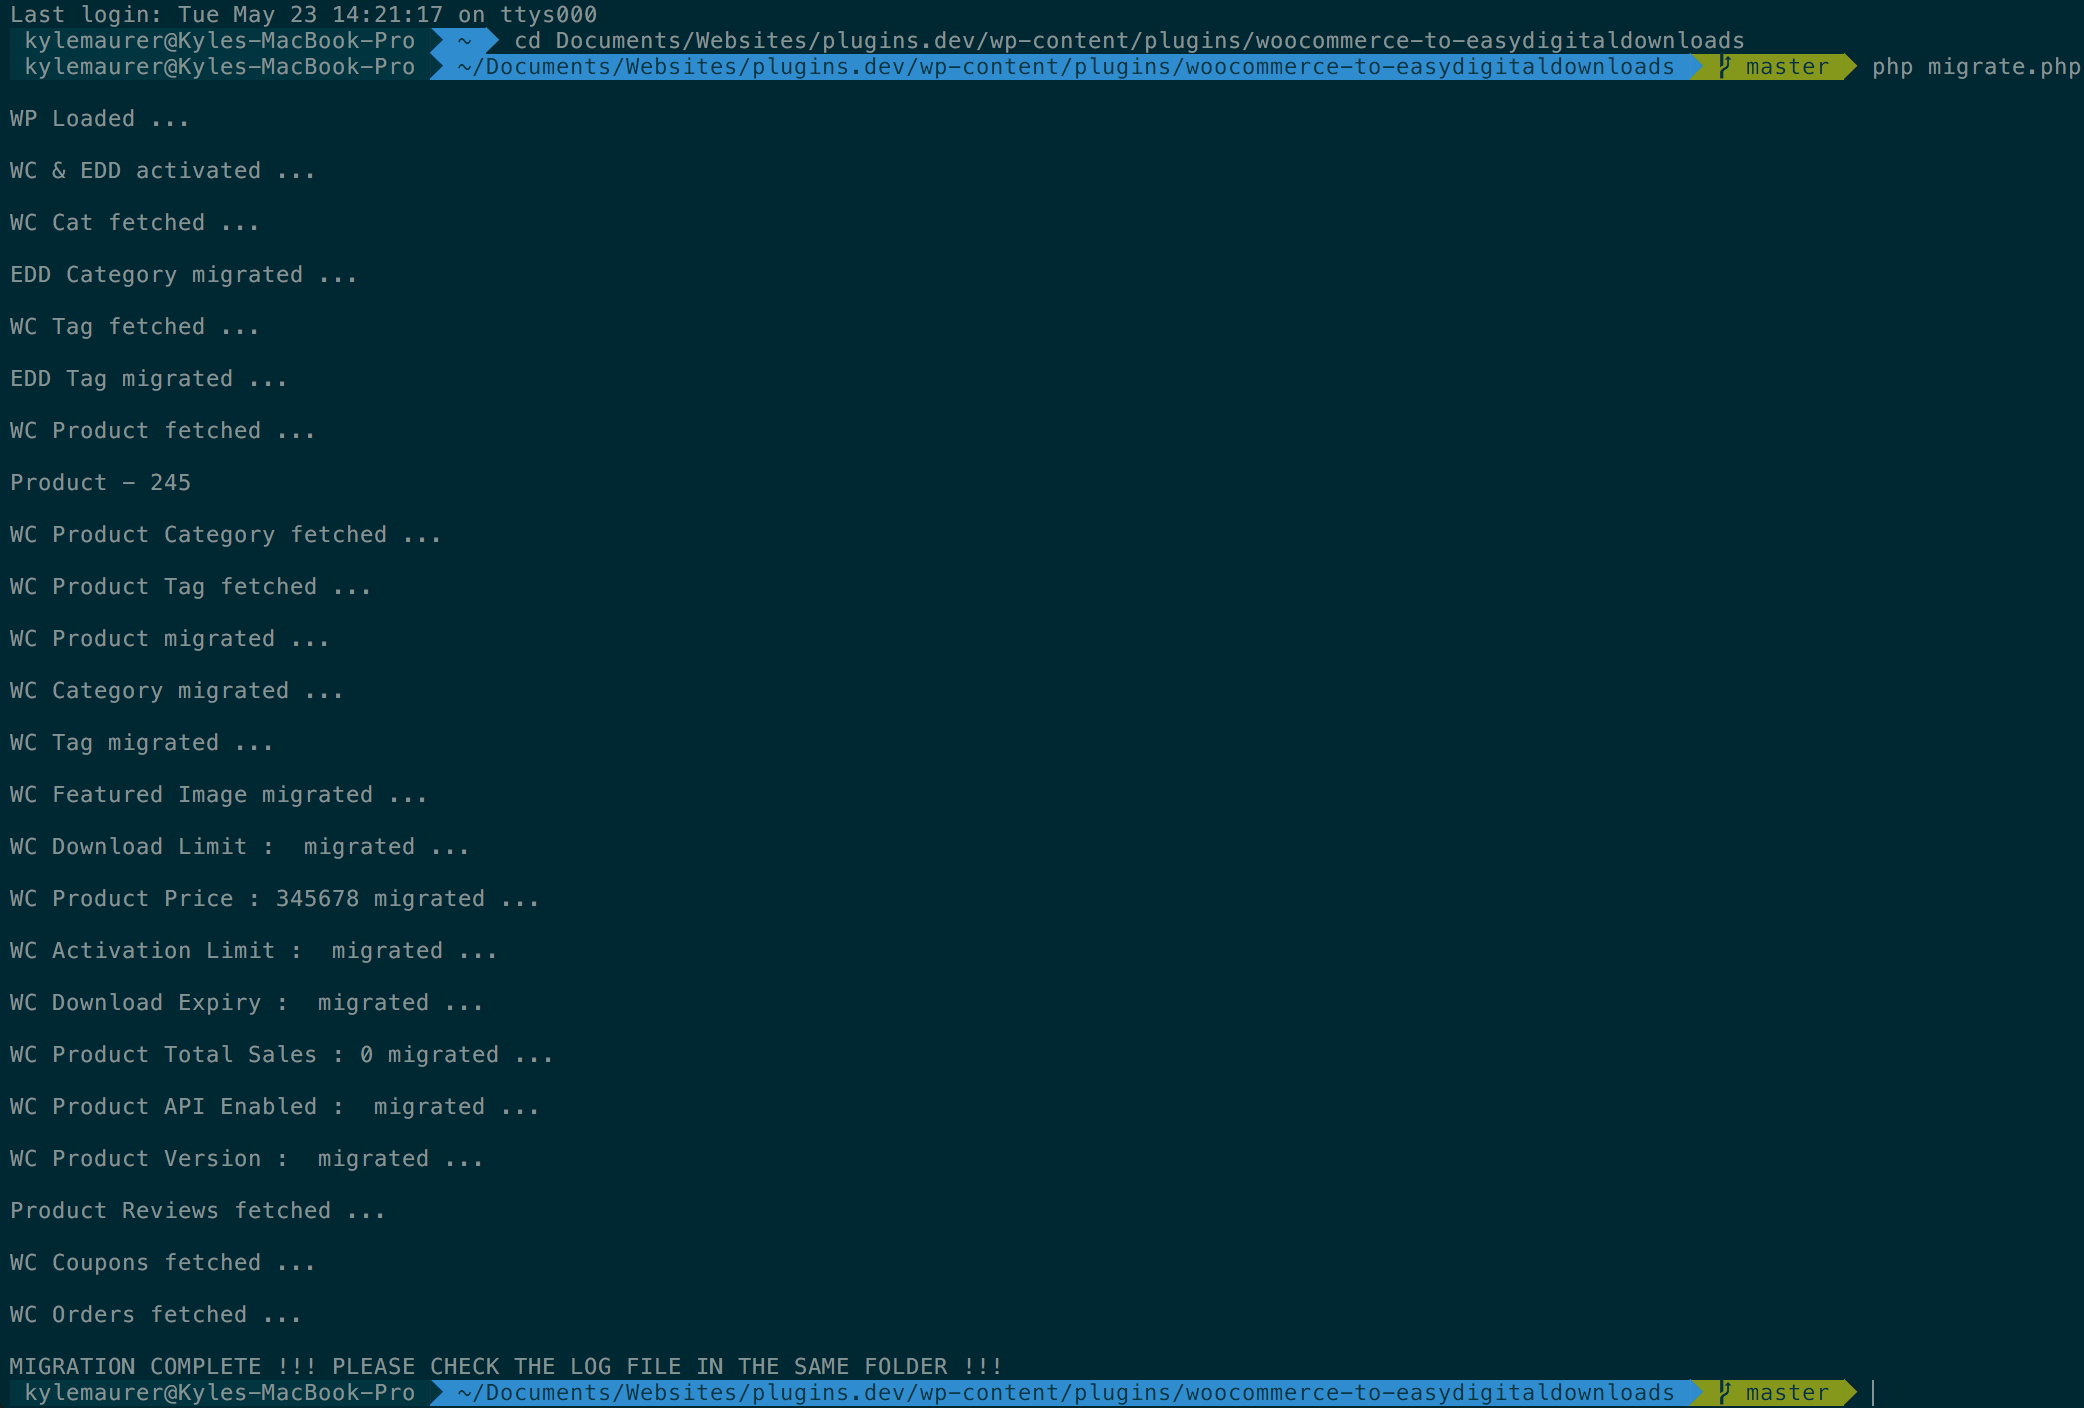 Terminal view showing commands for running PHP script